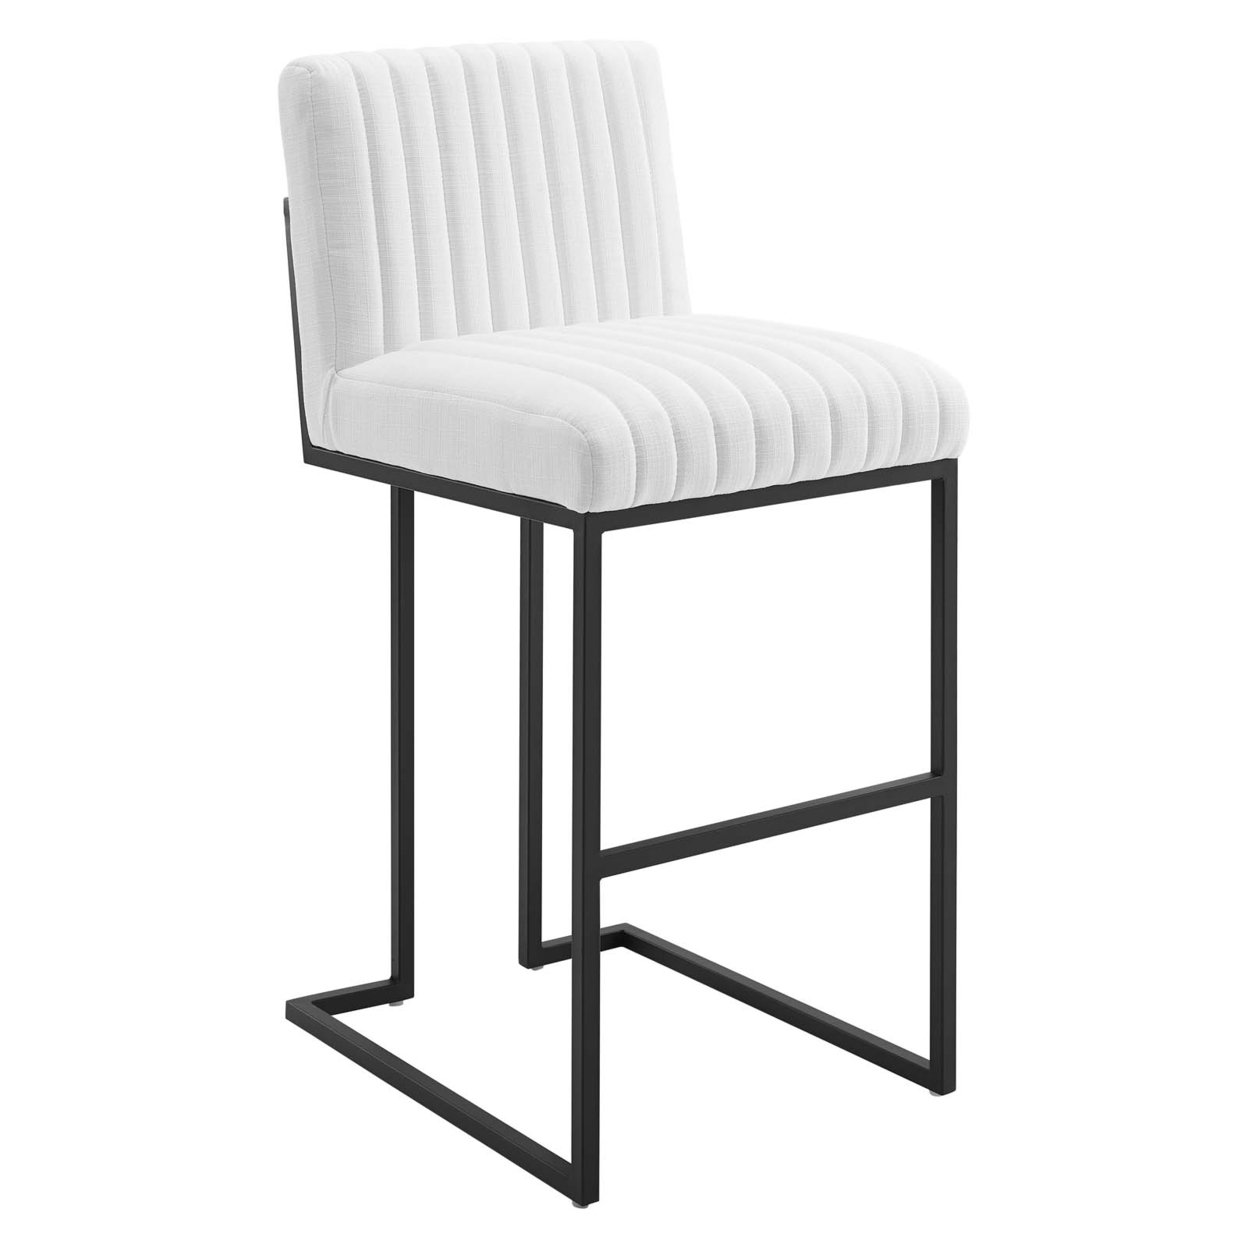 Indulge Channel Tufted Fabric Bar Stool, White